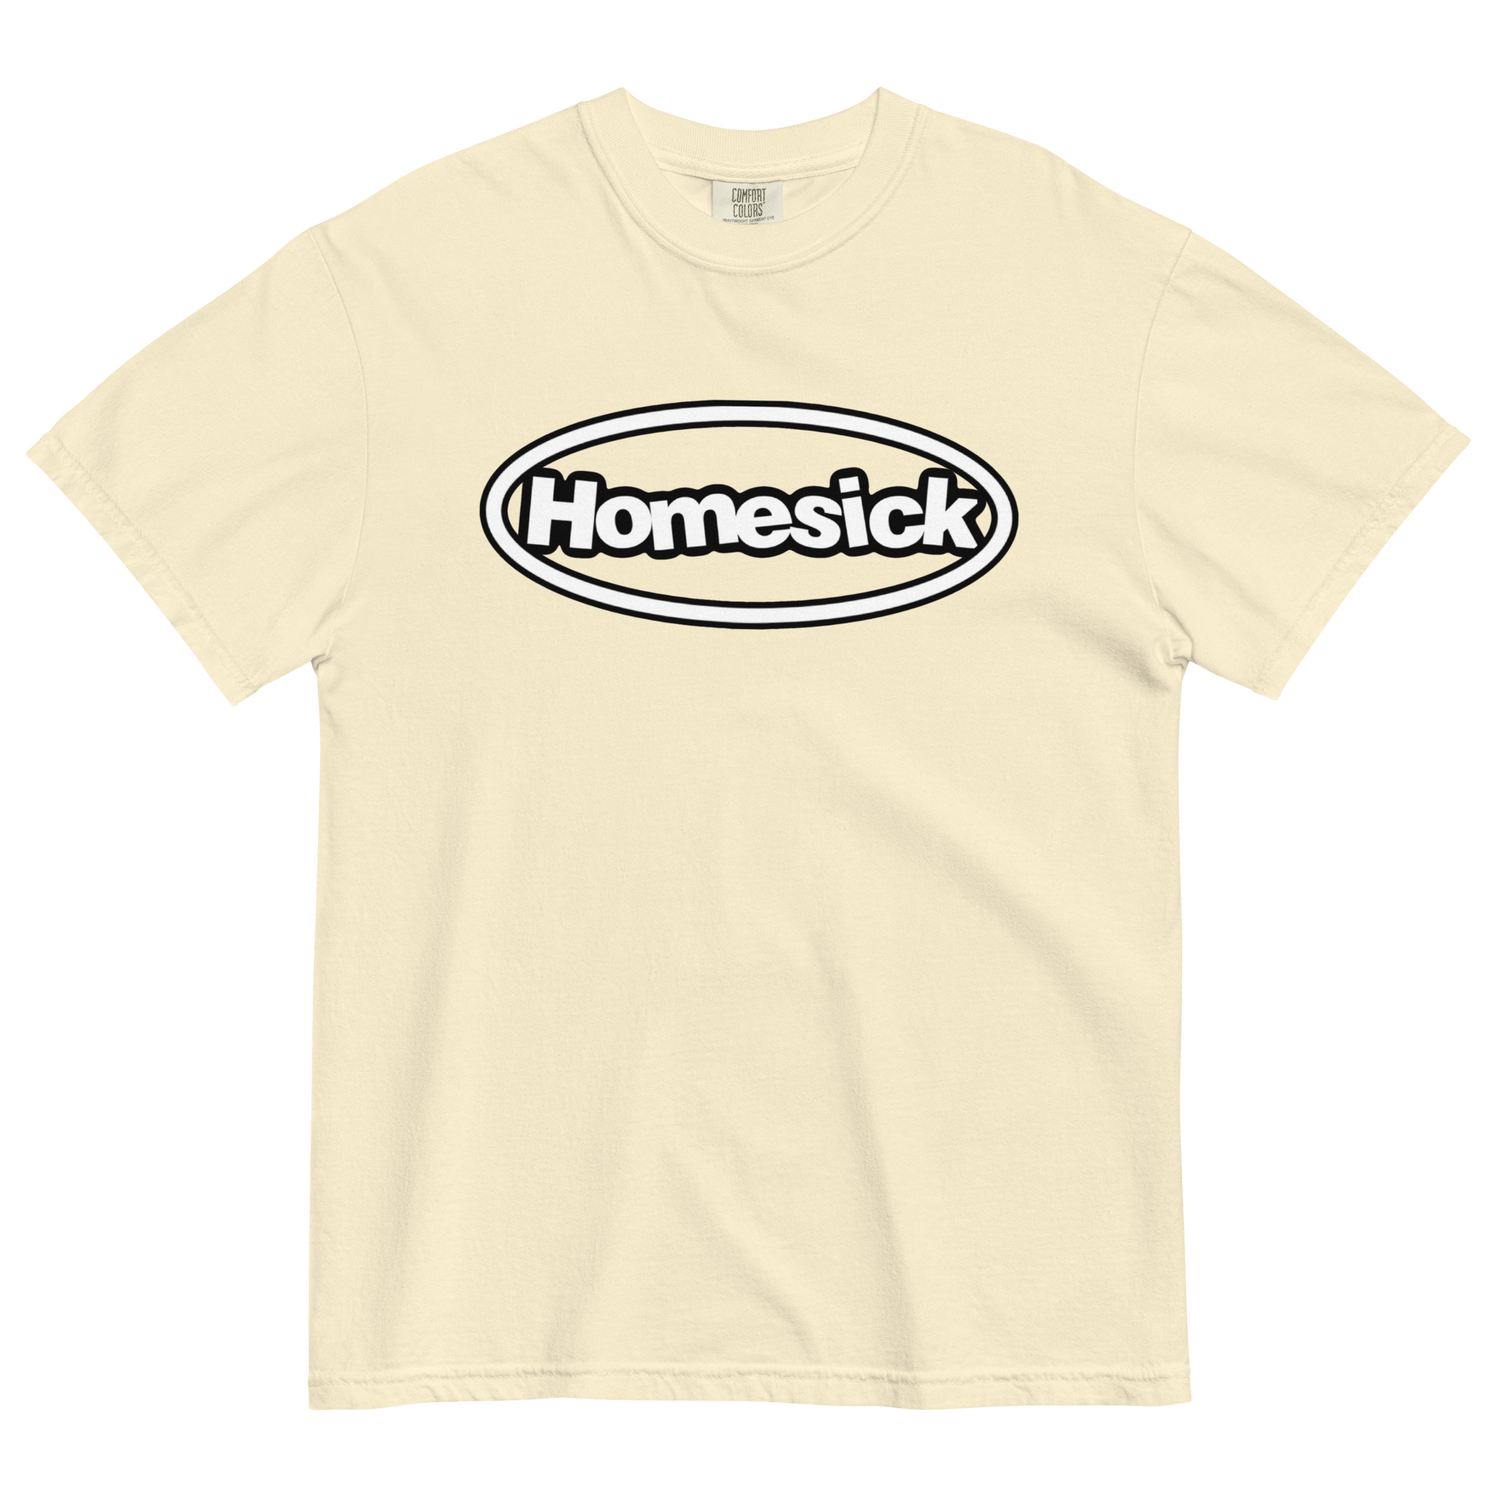 THE HOMESICK COLLECTION